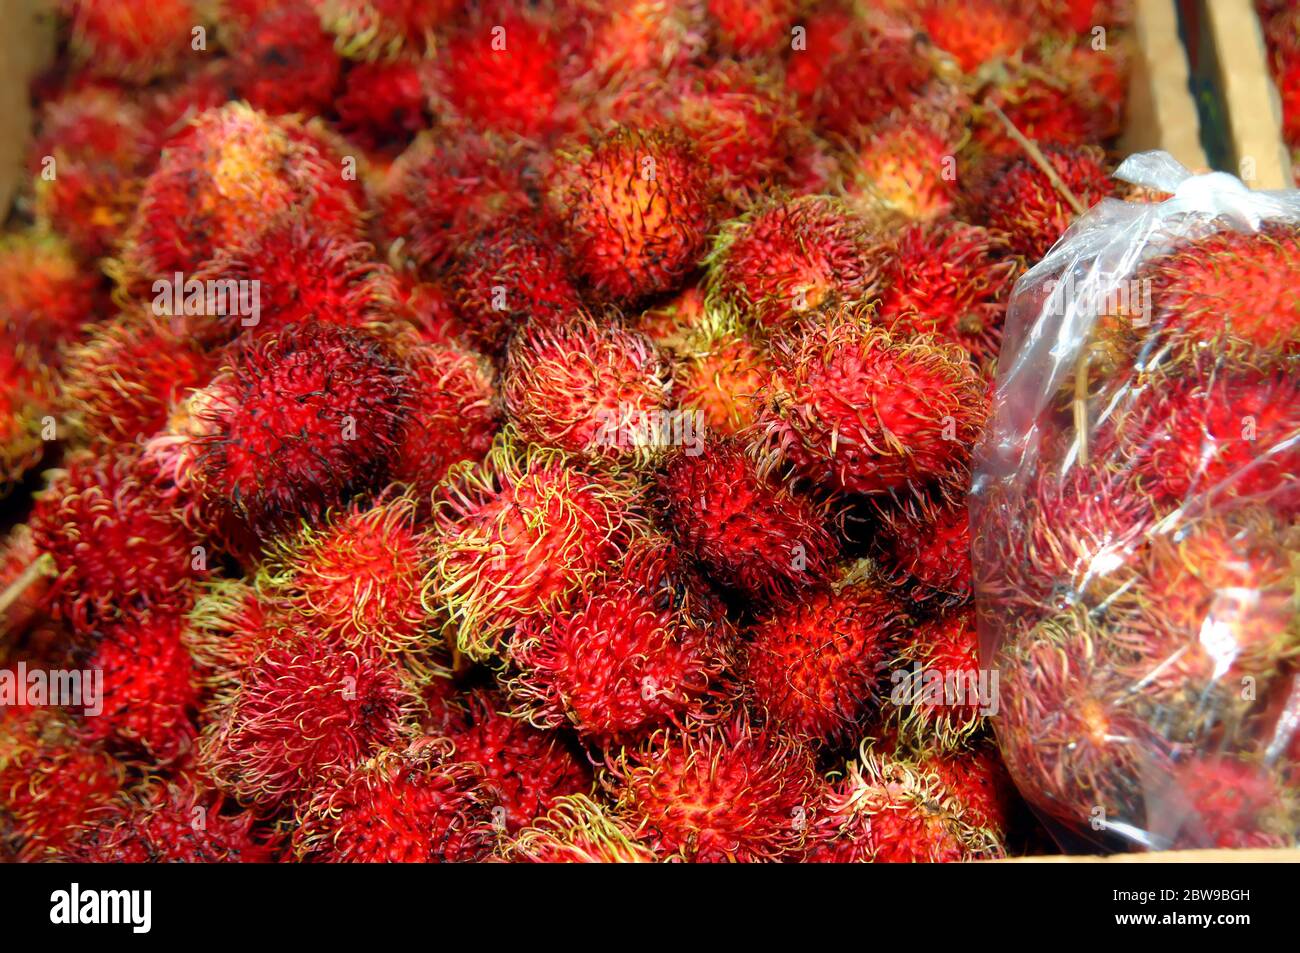 Rambutan is piled in boxes for sale at the Hilo Farmer's Market on the Big Island of Hawaii.  Right side of photo has a bag ready for sale. Stock Photo